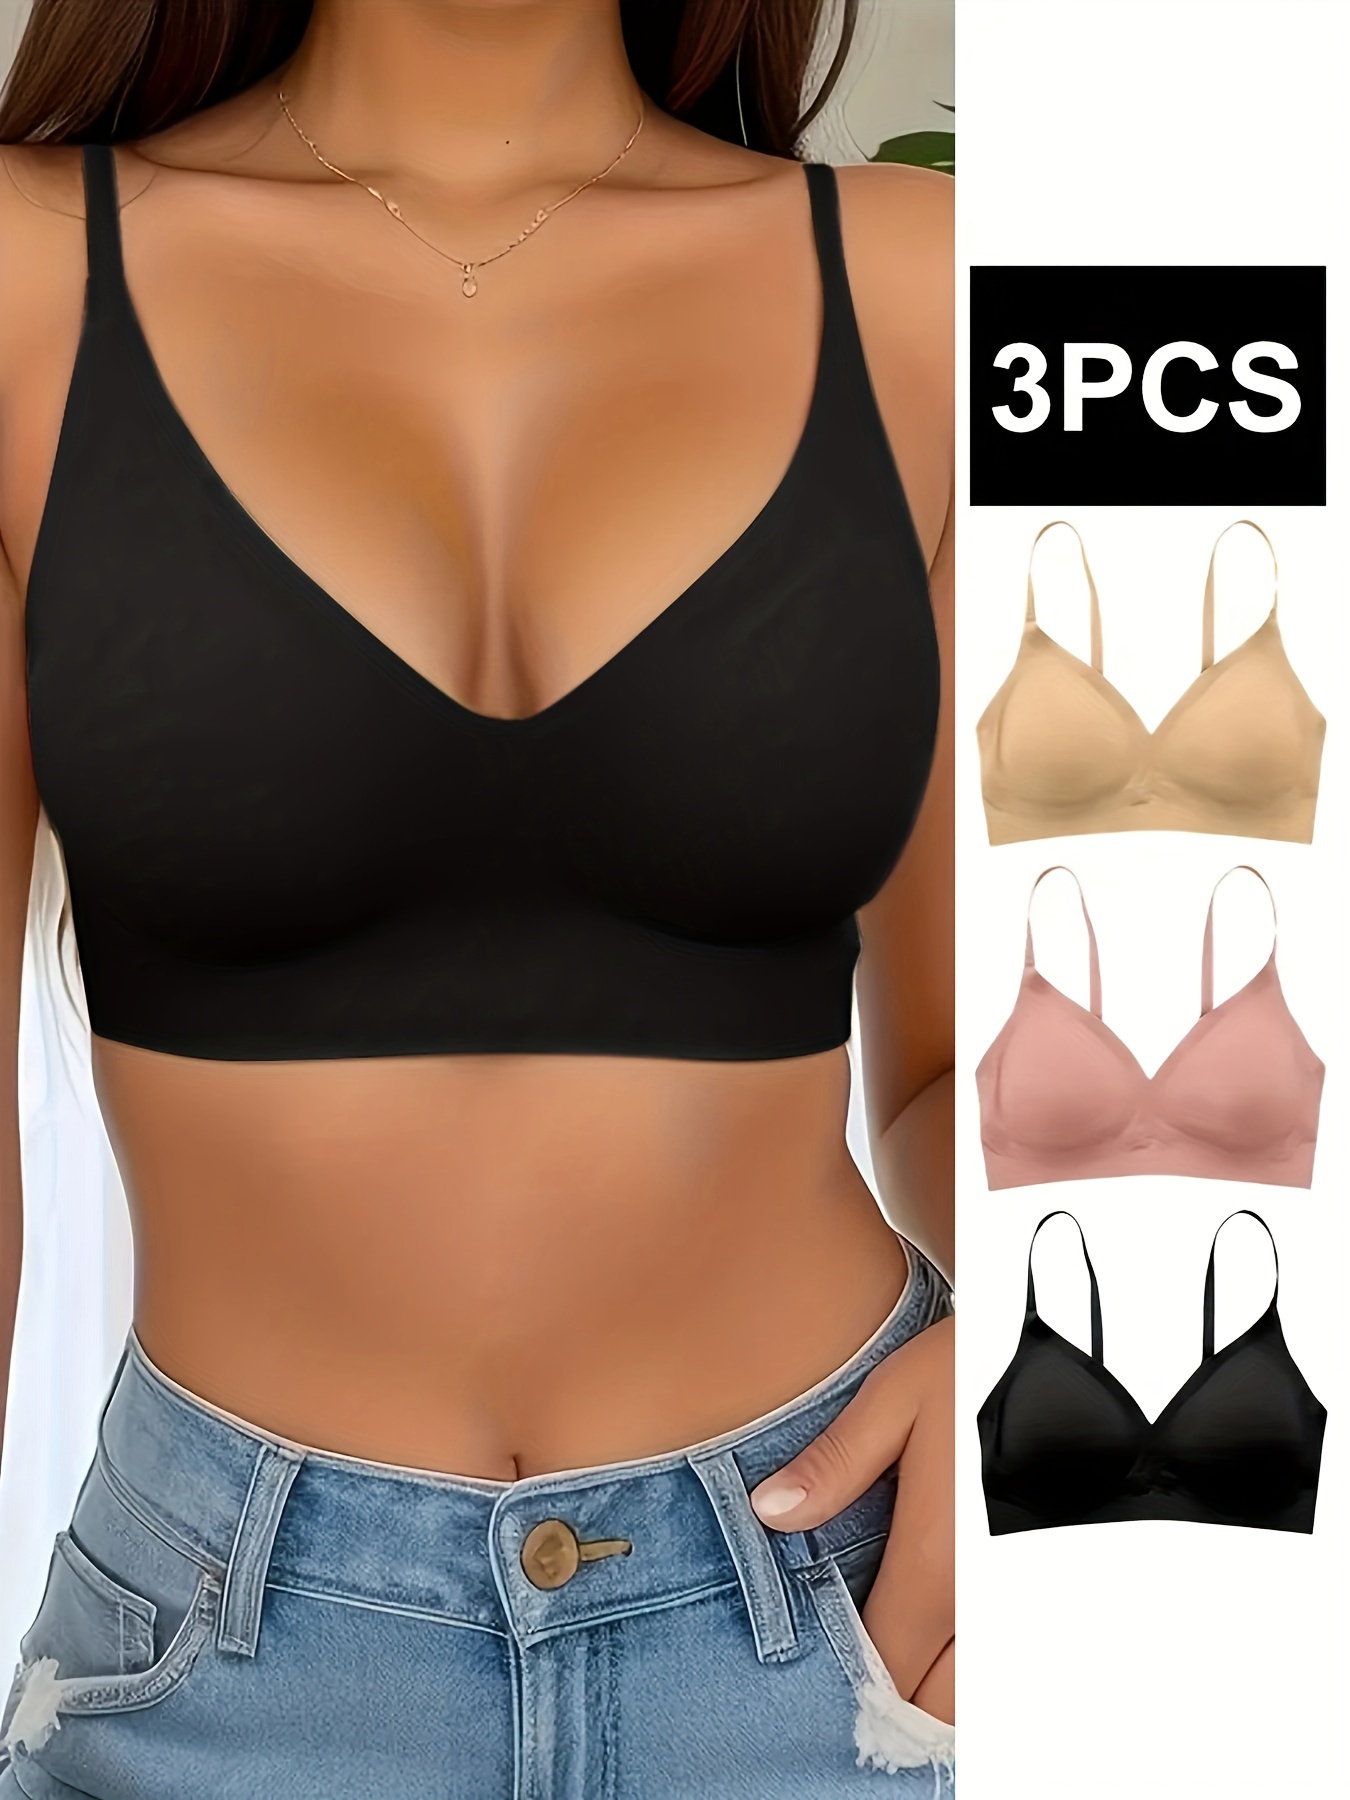 Seamless Bras For Women's Intimates Underwear Lingerie Push Up